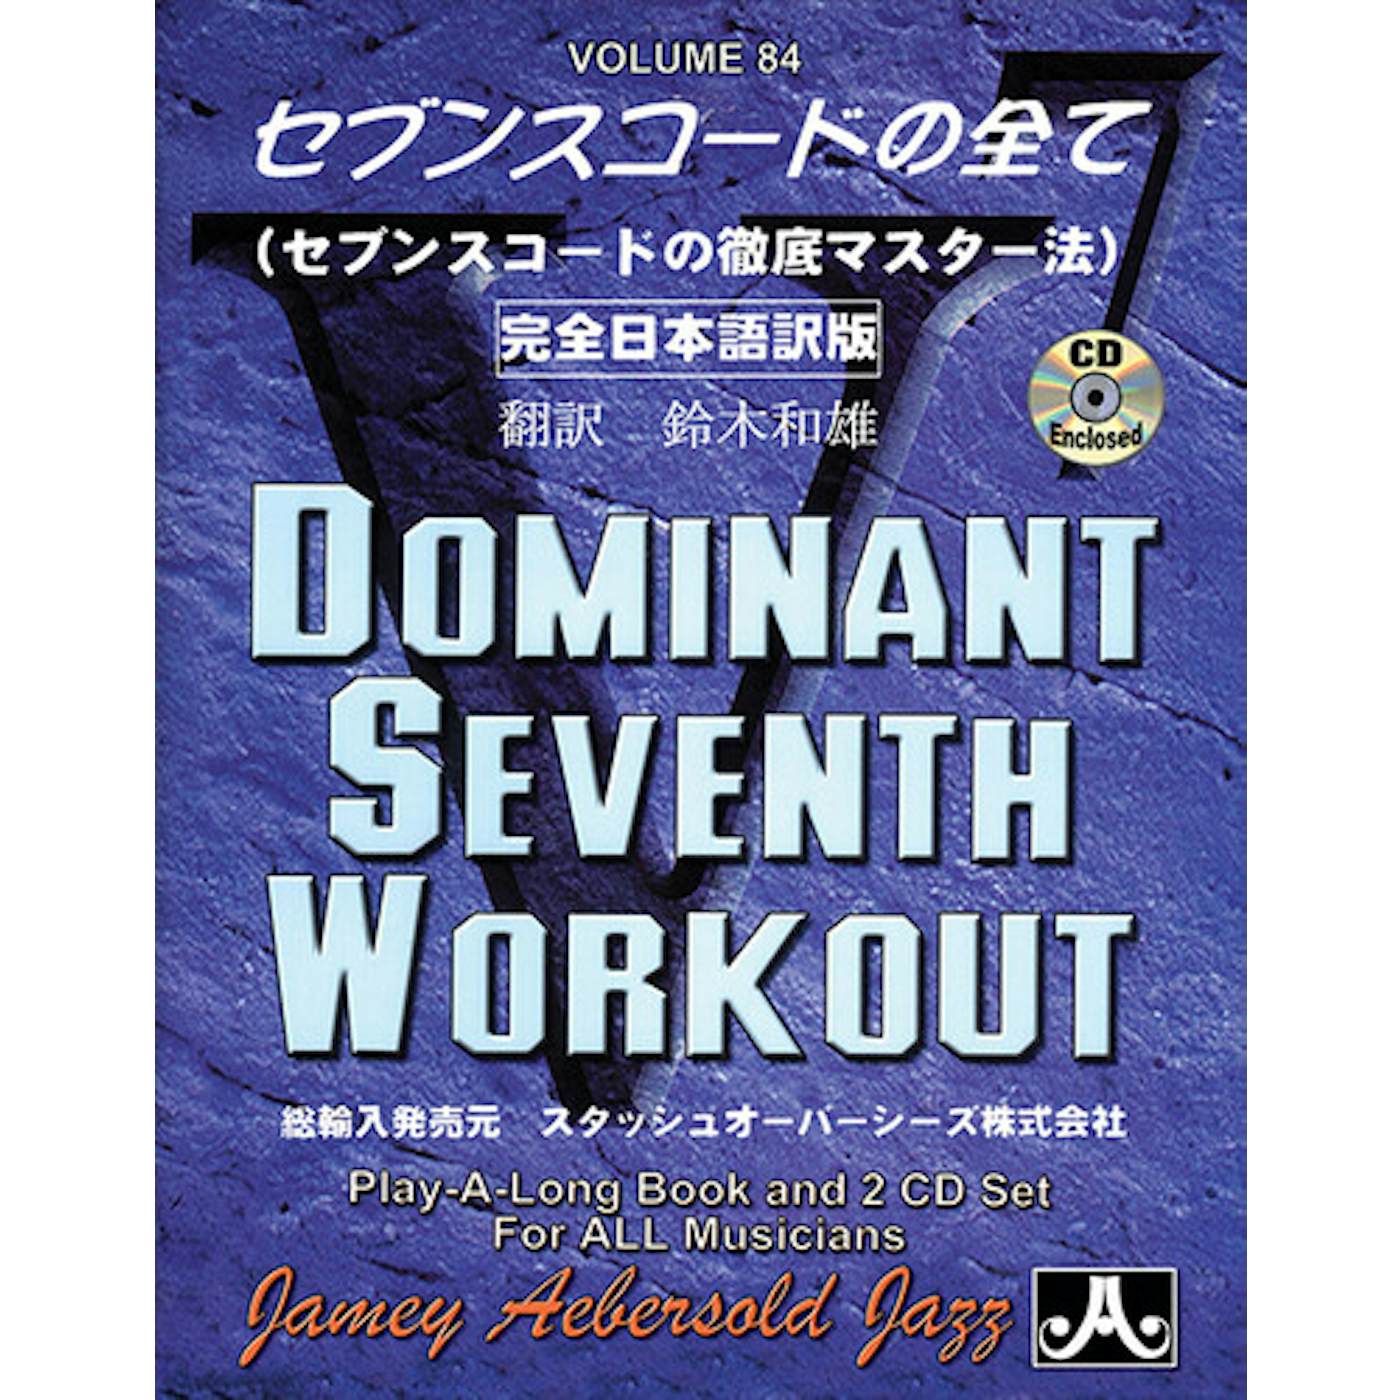 Jamey Aebersold VOLUME 84 - DOMINANT 7TH WORKOUT - JAPANESE CD